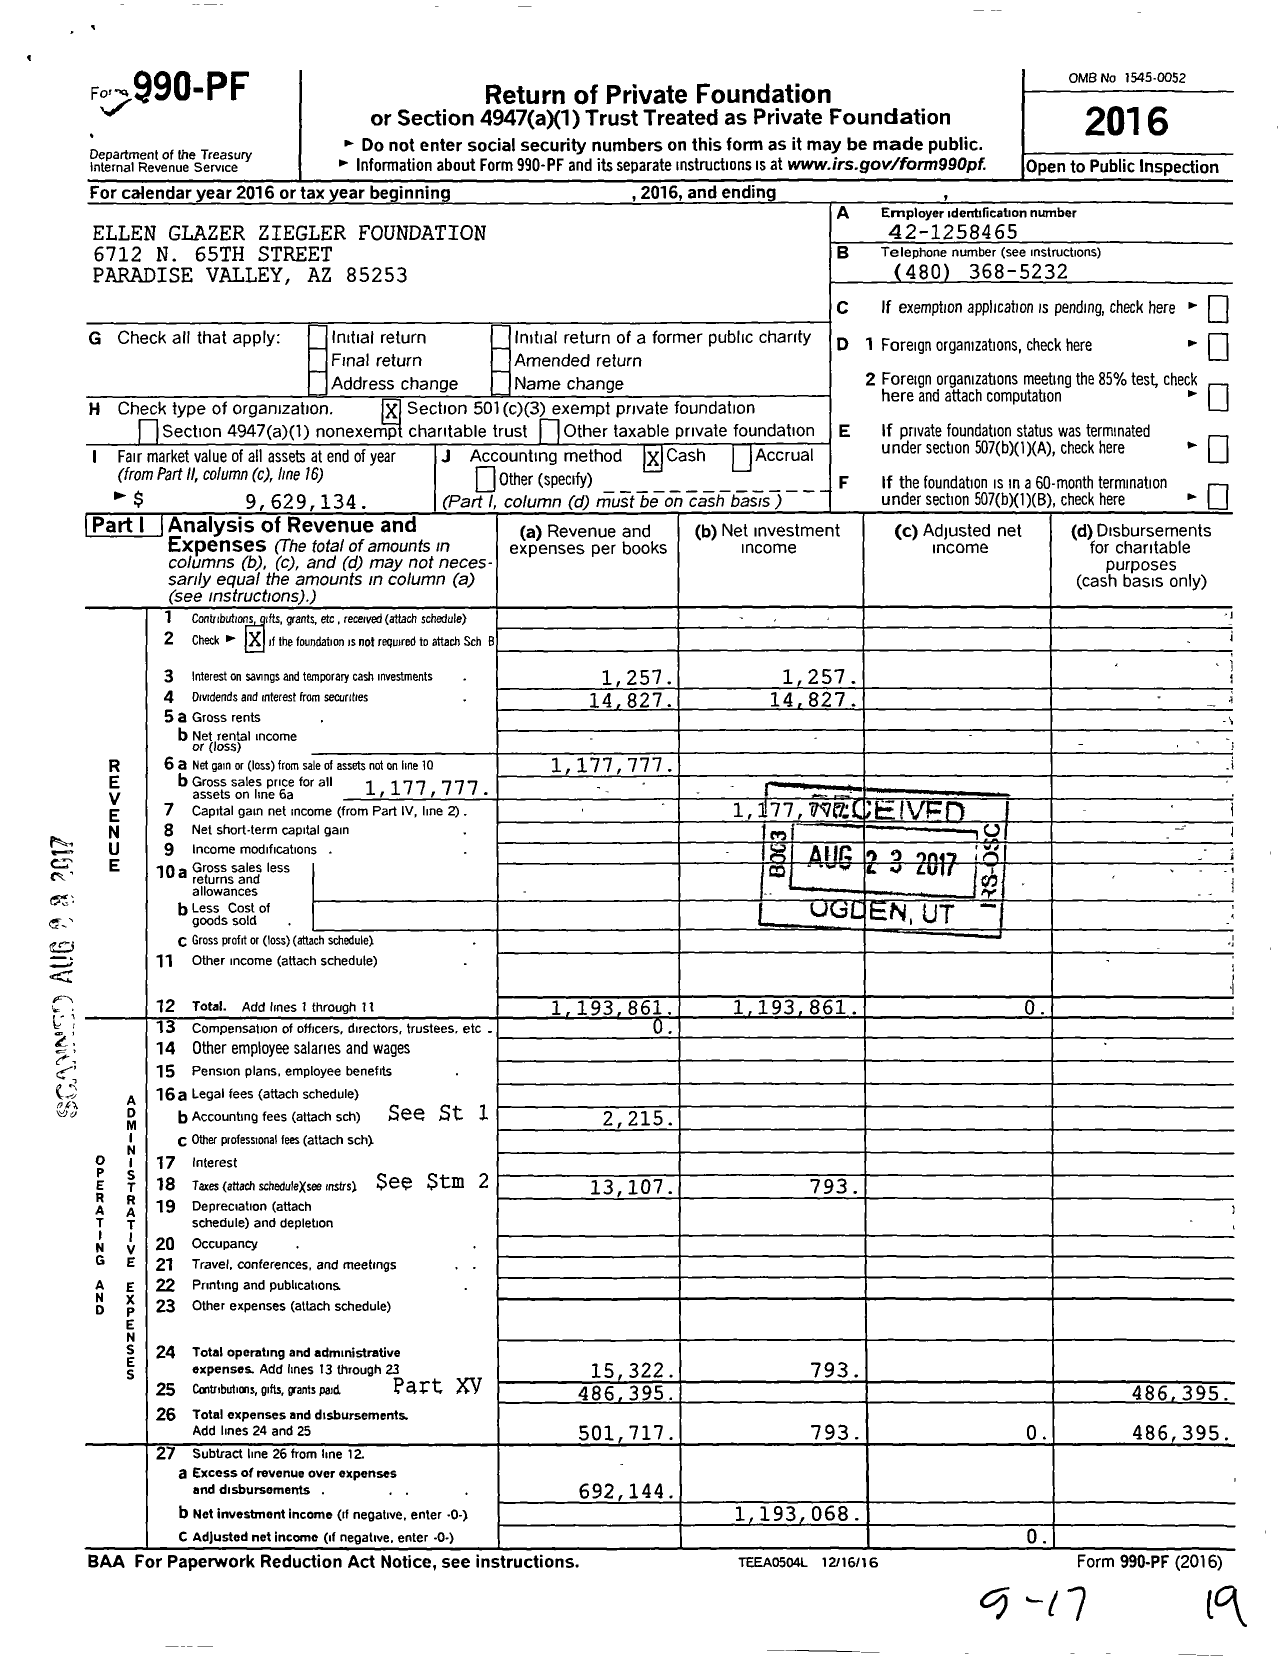 Image of first page of 2016 Form 990PF for Ellen Glazer Ziegler Foundation